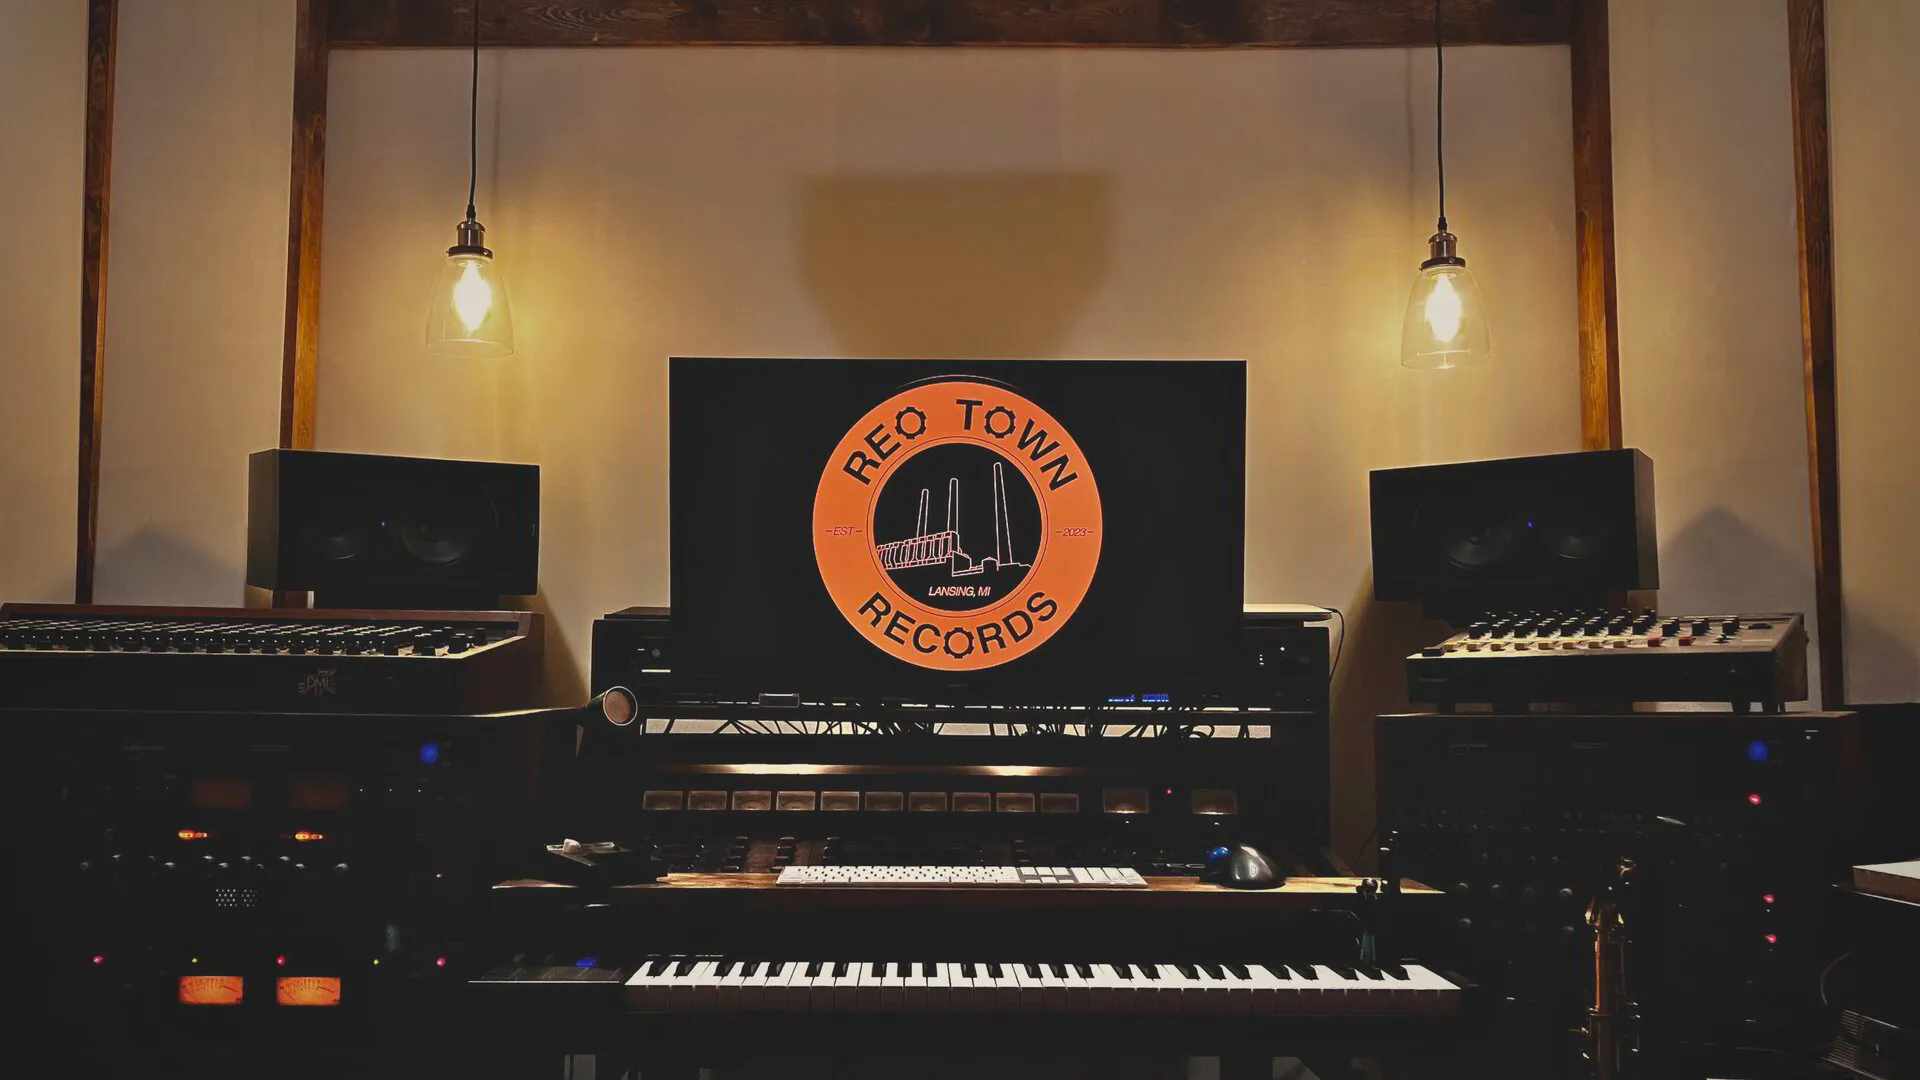 Desktop with a piano keyboard in a recording studio.